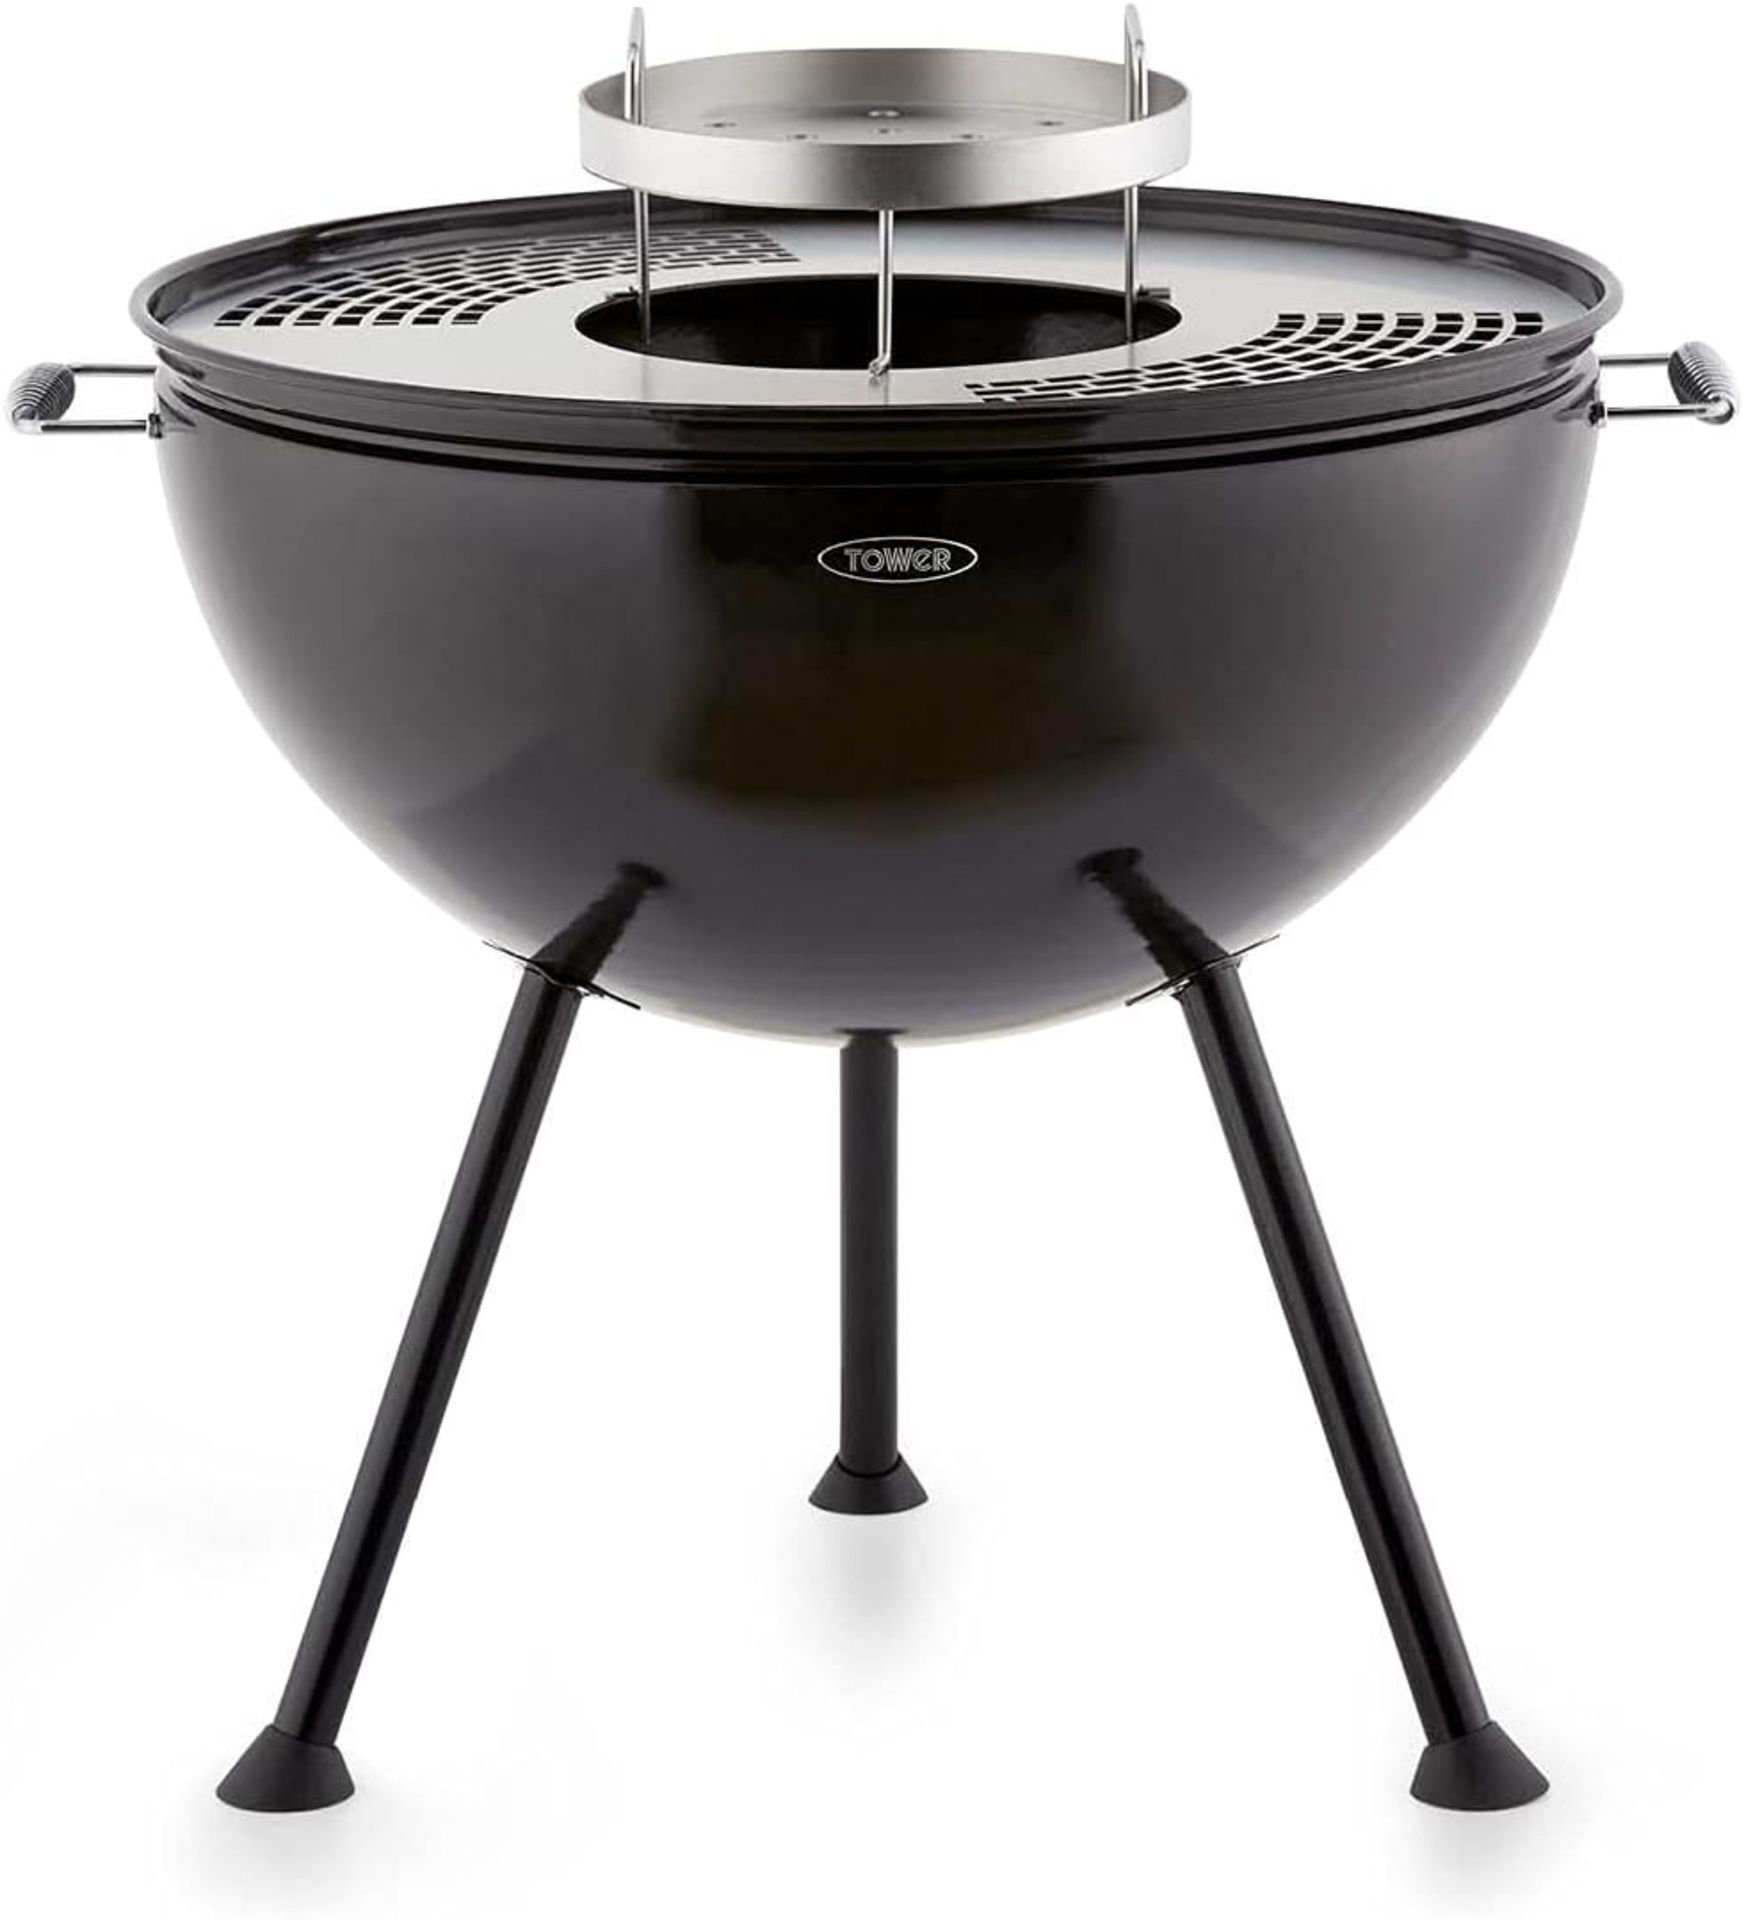 Brand New Tower Sphere Fire Pit and BBQ Grill, Black, DUAL USE â€“ This multi-functional pit n grill - Image 2 of 6